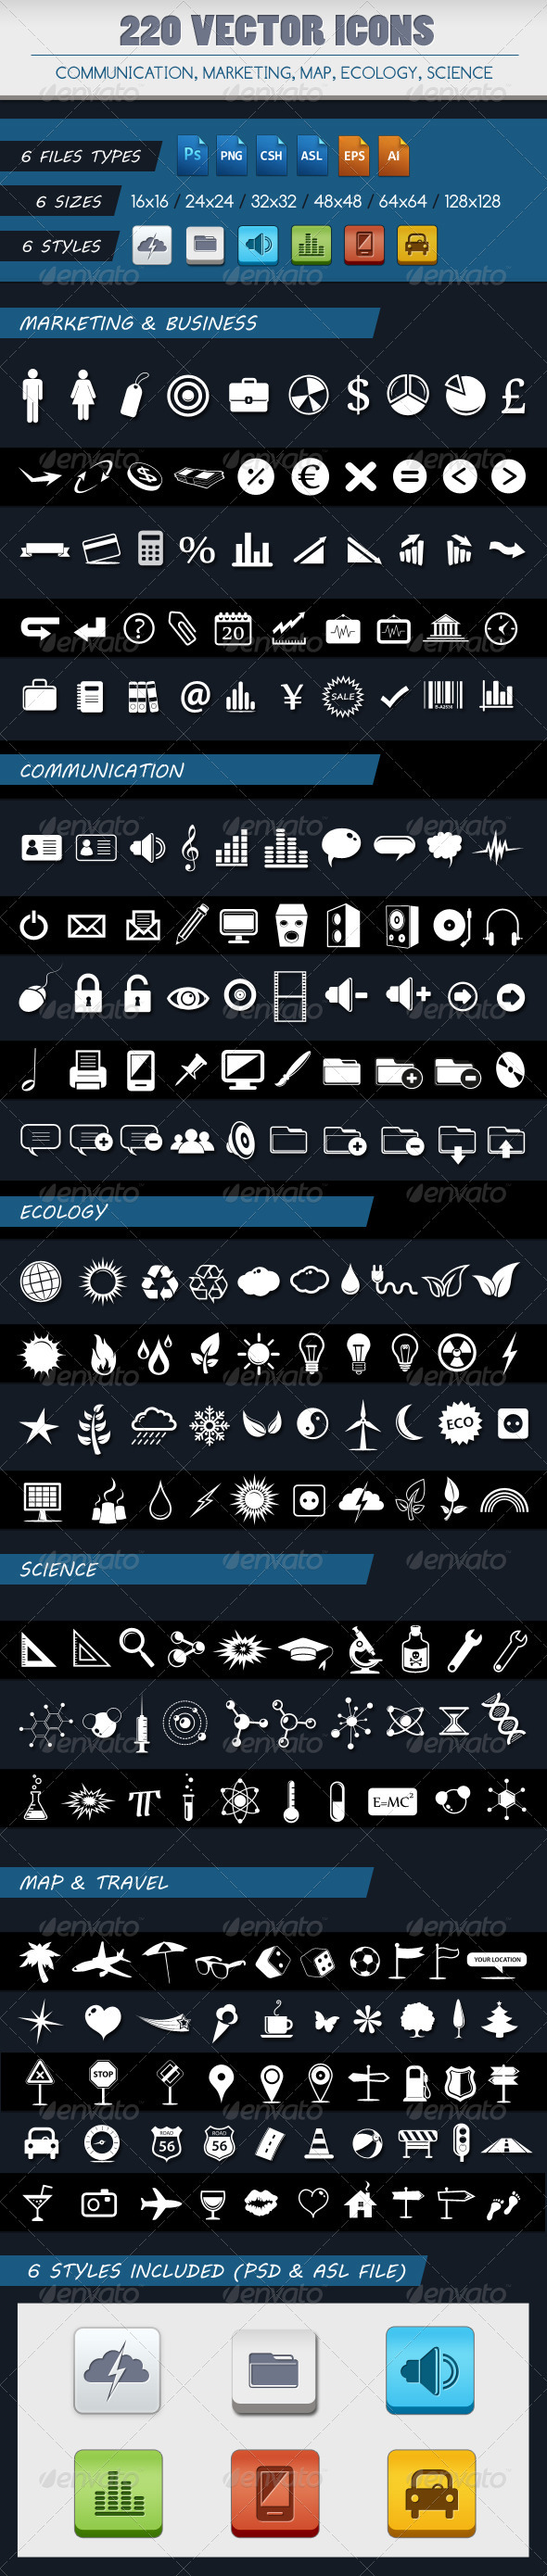 220 VECTOR ICONS OF 5 CATEGORIES